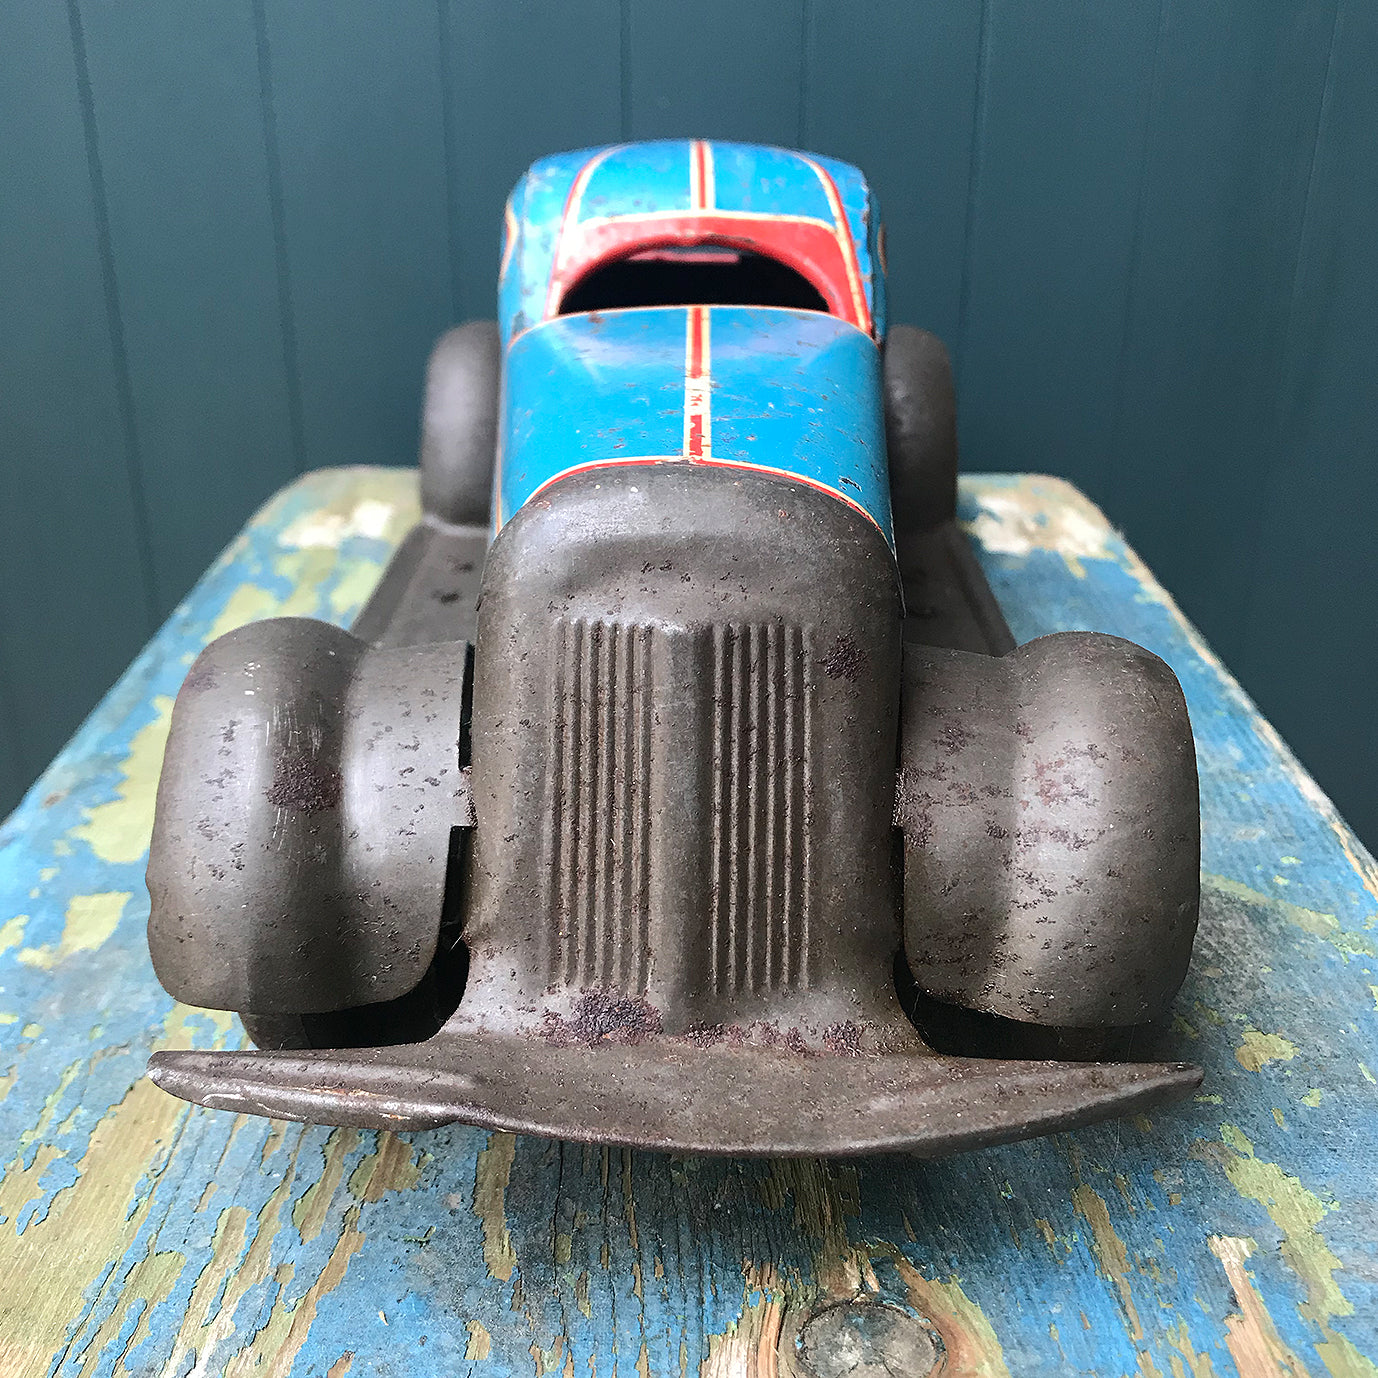 Rare large pre-war 1935 Marx clockwork tinplate LMC 217 Mechanical Coupé in the rare blue pinstripe finish. Marked 'Made in England' on the boot and still having its back running step. This model was made in the Marx Dudley factory - SHOP NOW - www.intovintage.co.uk